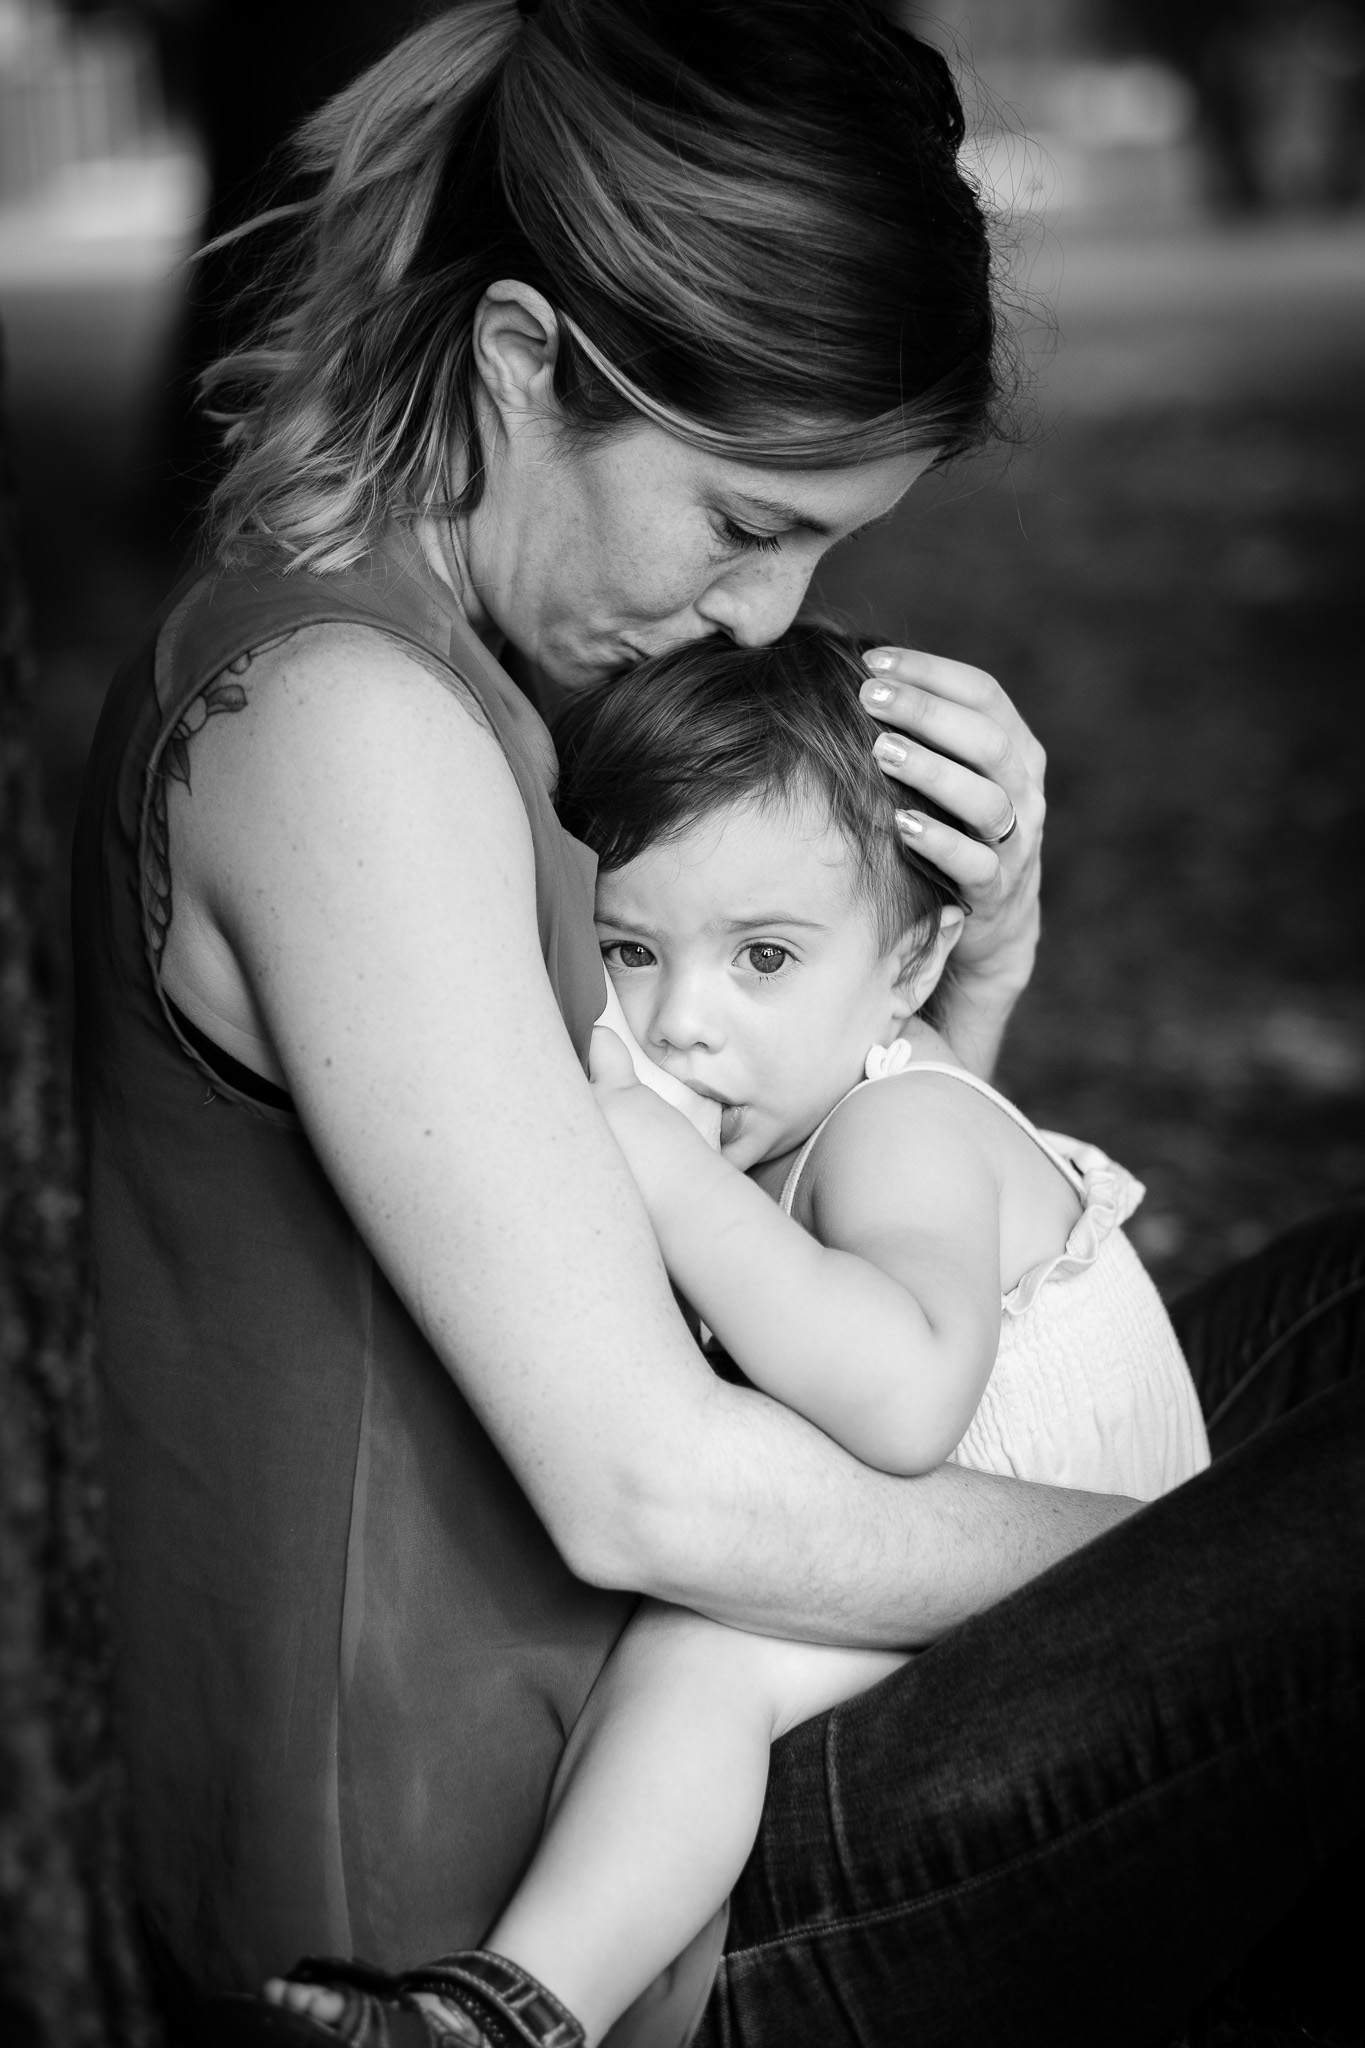  “For me breastfeeding is more than just feeding my daughters. it’s about nurturing, comforting, being there for them when they need me the most. I’ll always look back on these days with such a accomplished feeling.” ~ Claudia and her daughter Billie